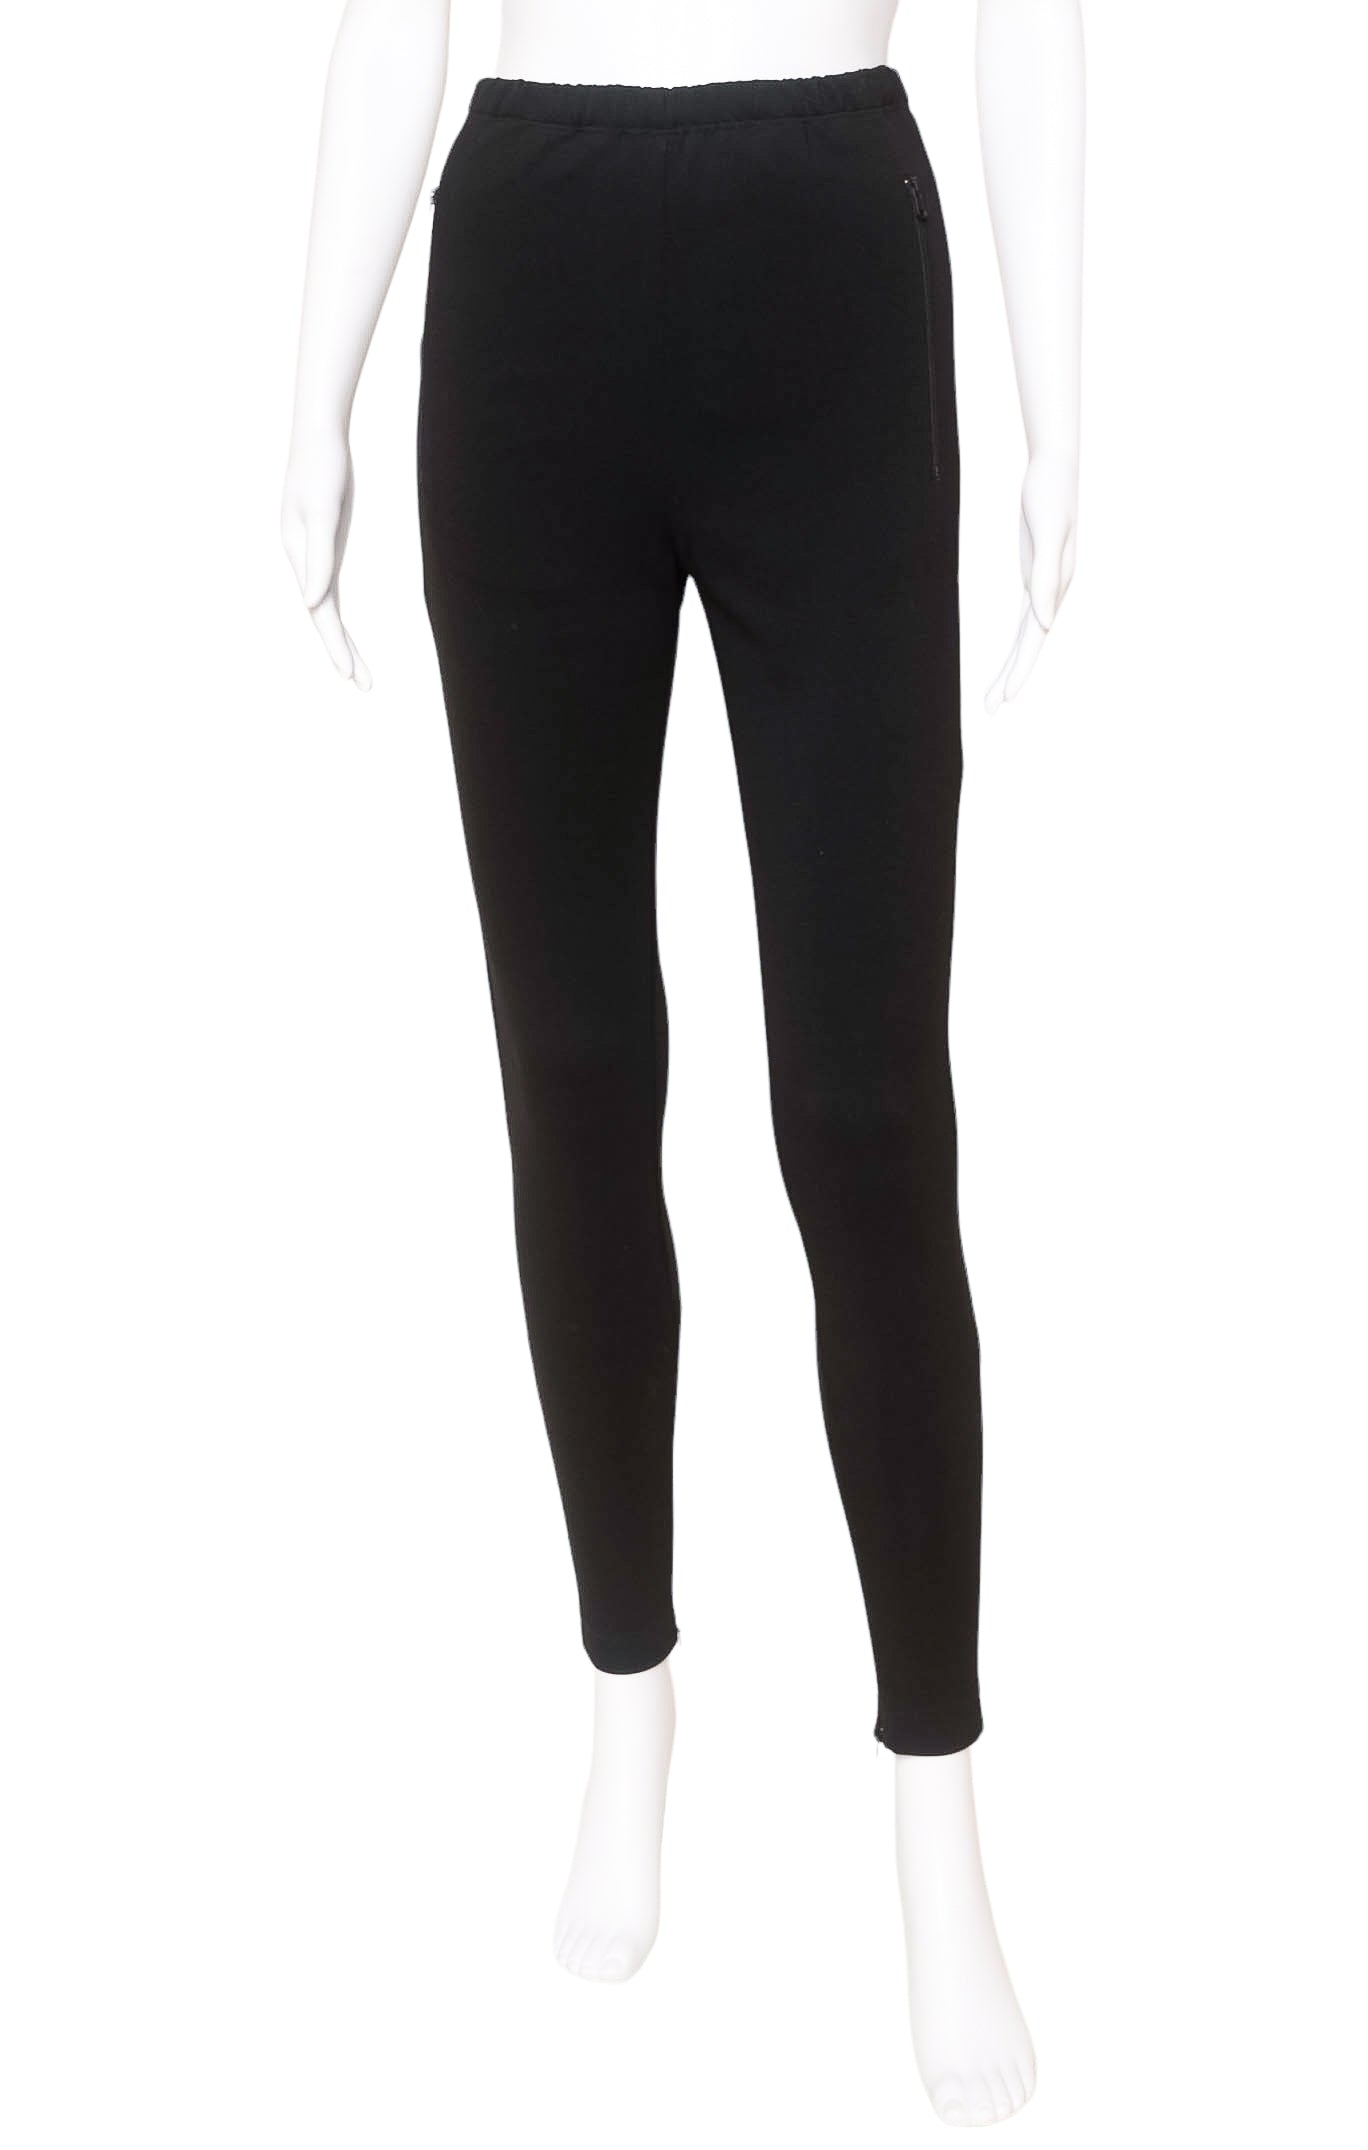 NIKE (NEW) with tags Leggings Size: S